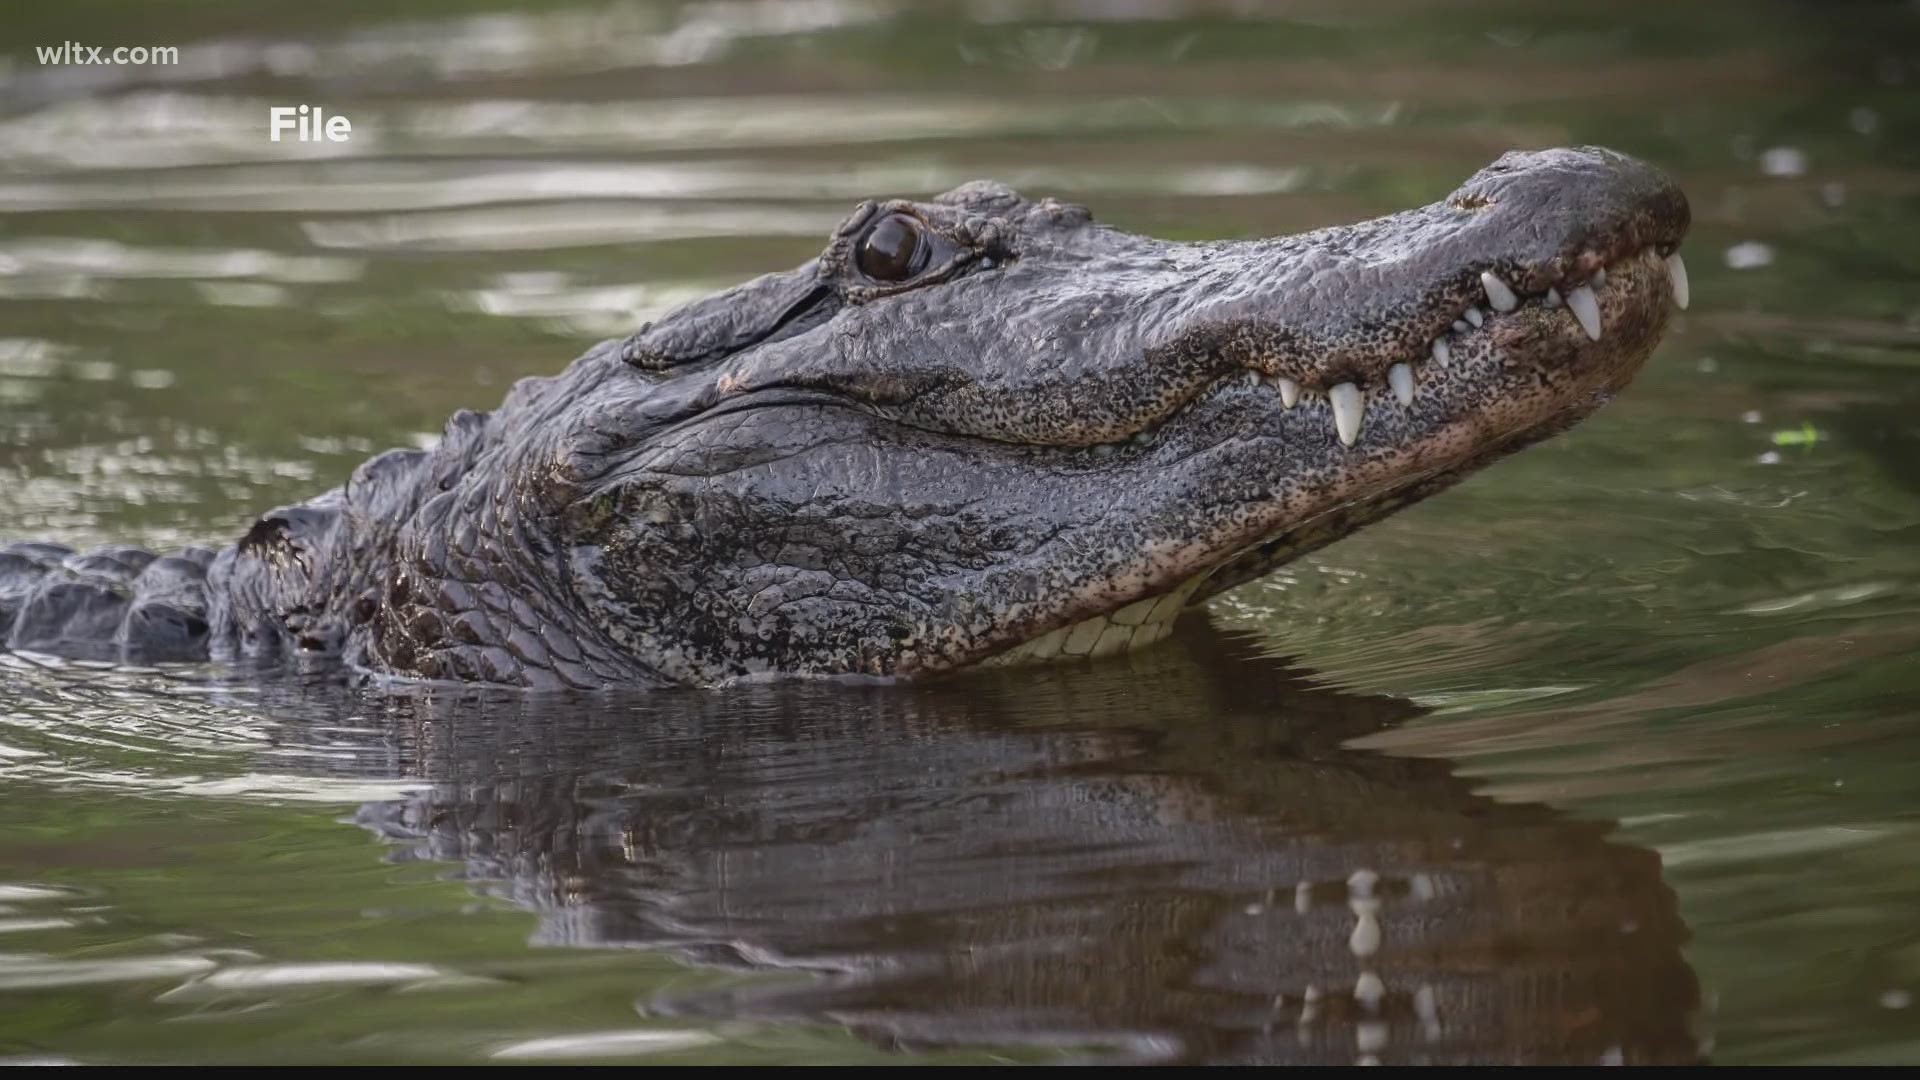 The South Carolina Department of Natural Resources says it is possible for alligators to be see on the Lexington and Saluda county side of the lake.